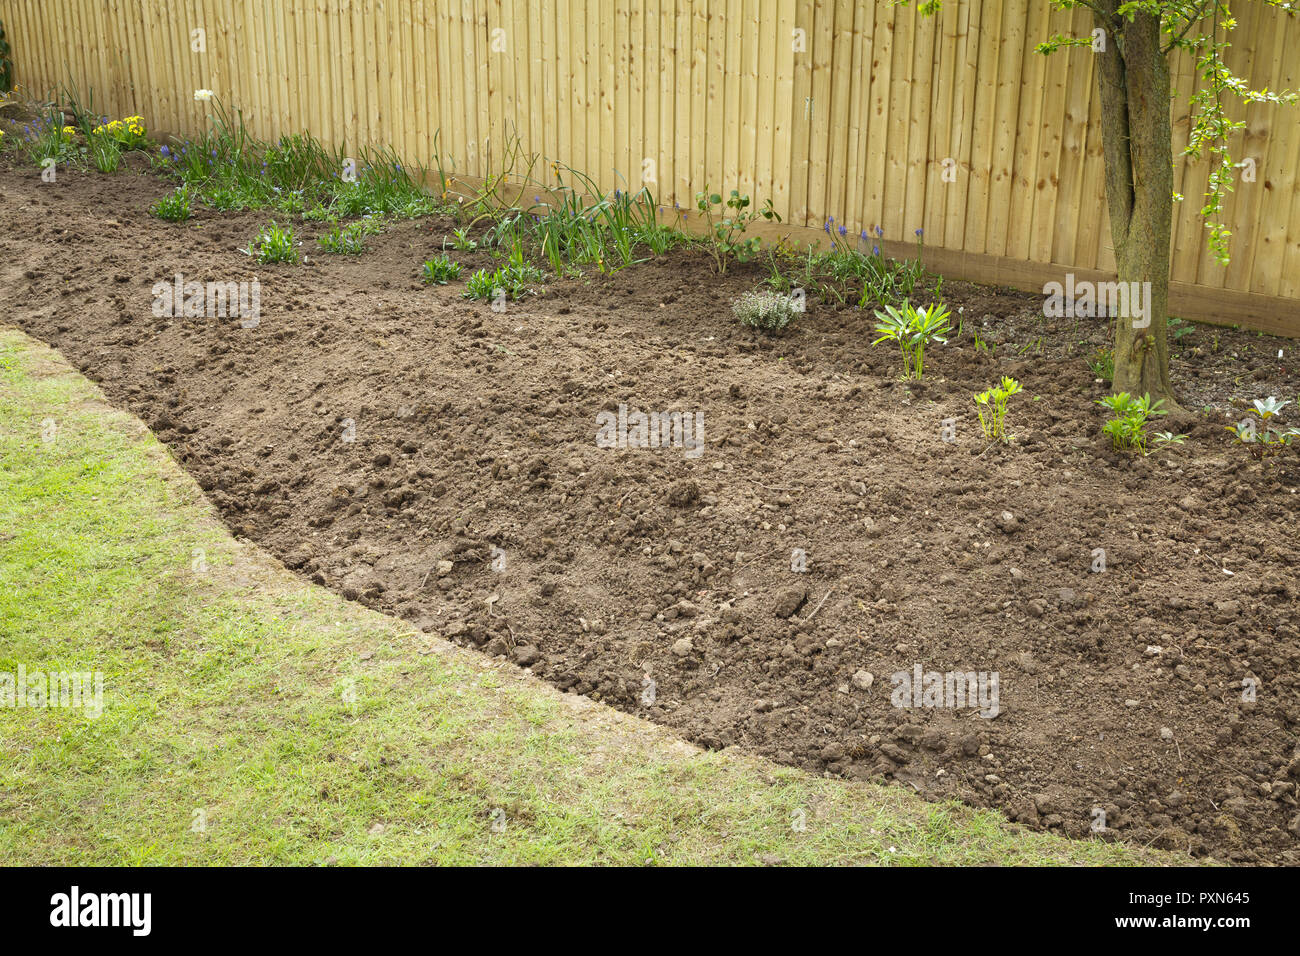 Preparing A Garden Flowerbed For Planting The Flower Bed Is Shown